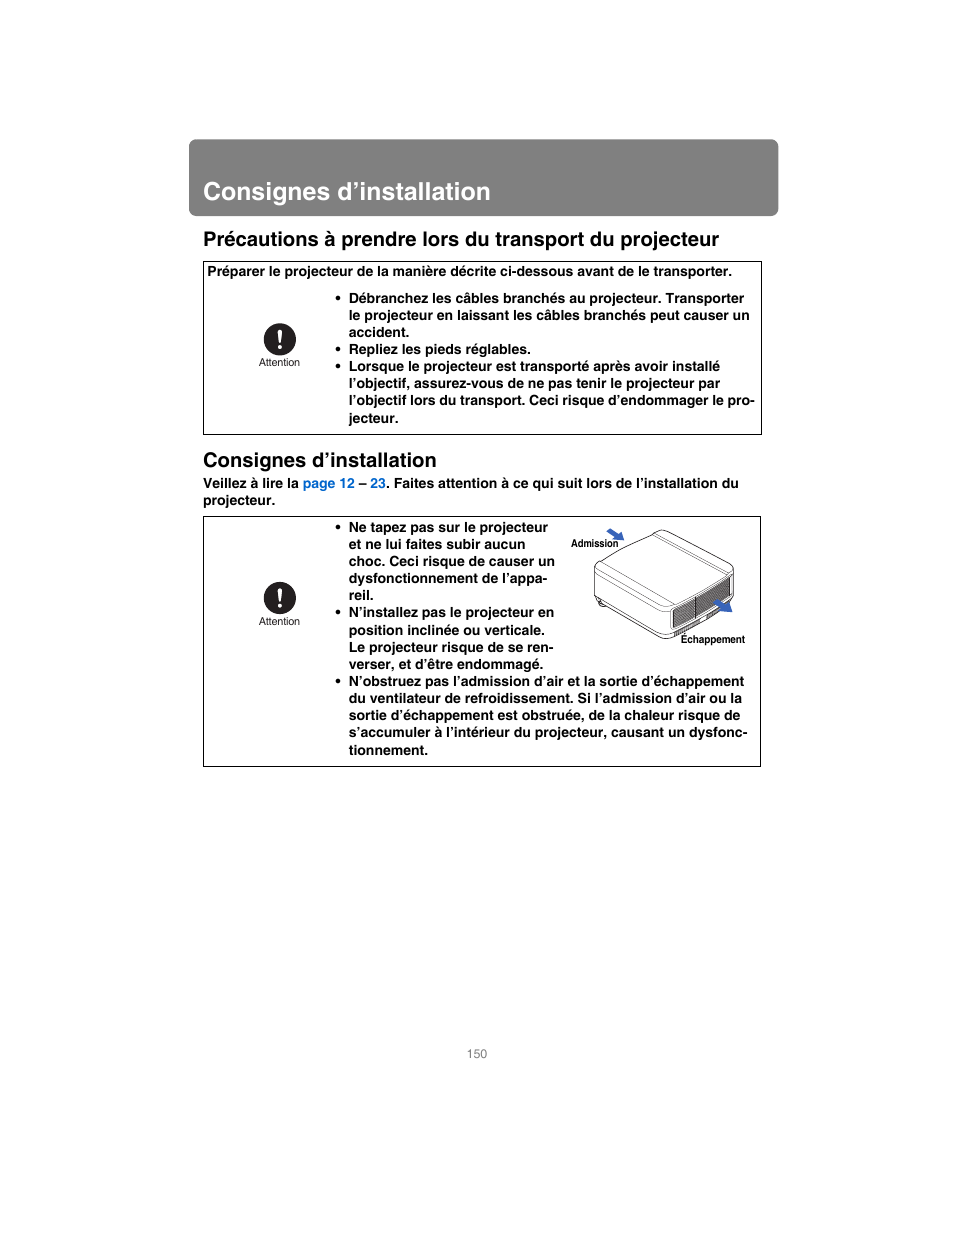 Consignes d’installation | Canon XEED WUX4000 Manuel d'utilisation | Page 150 / 248